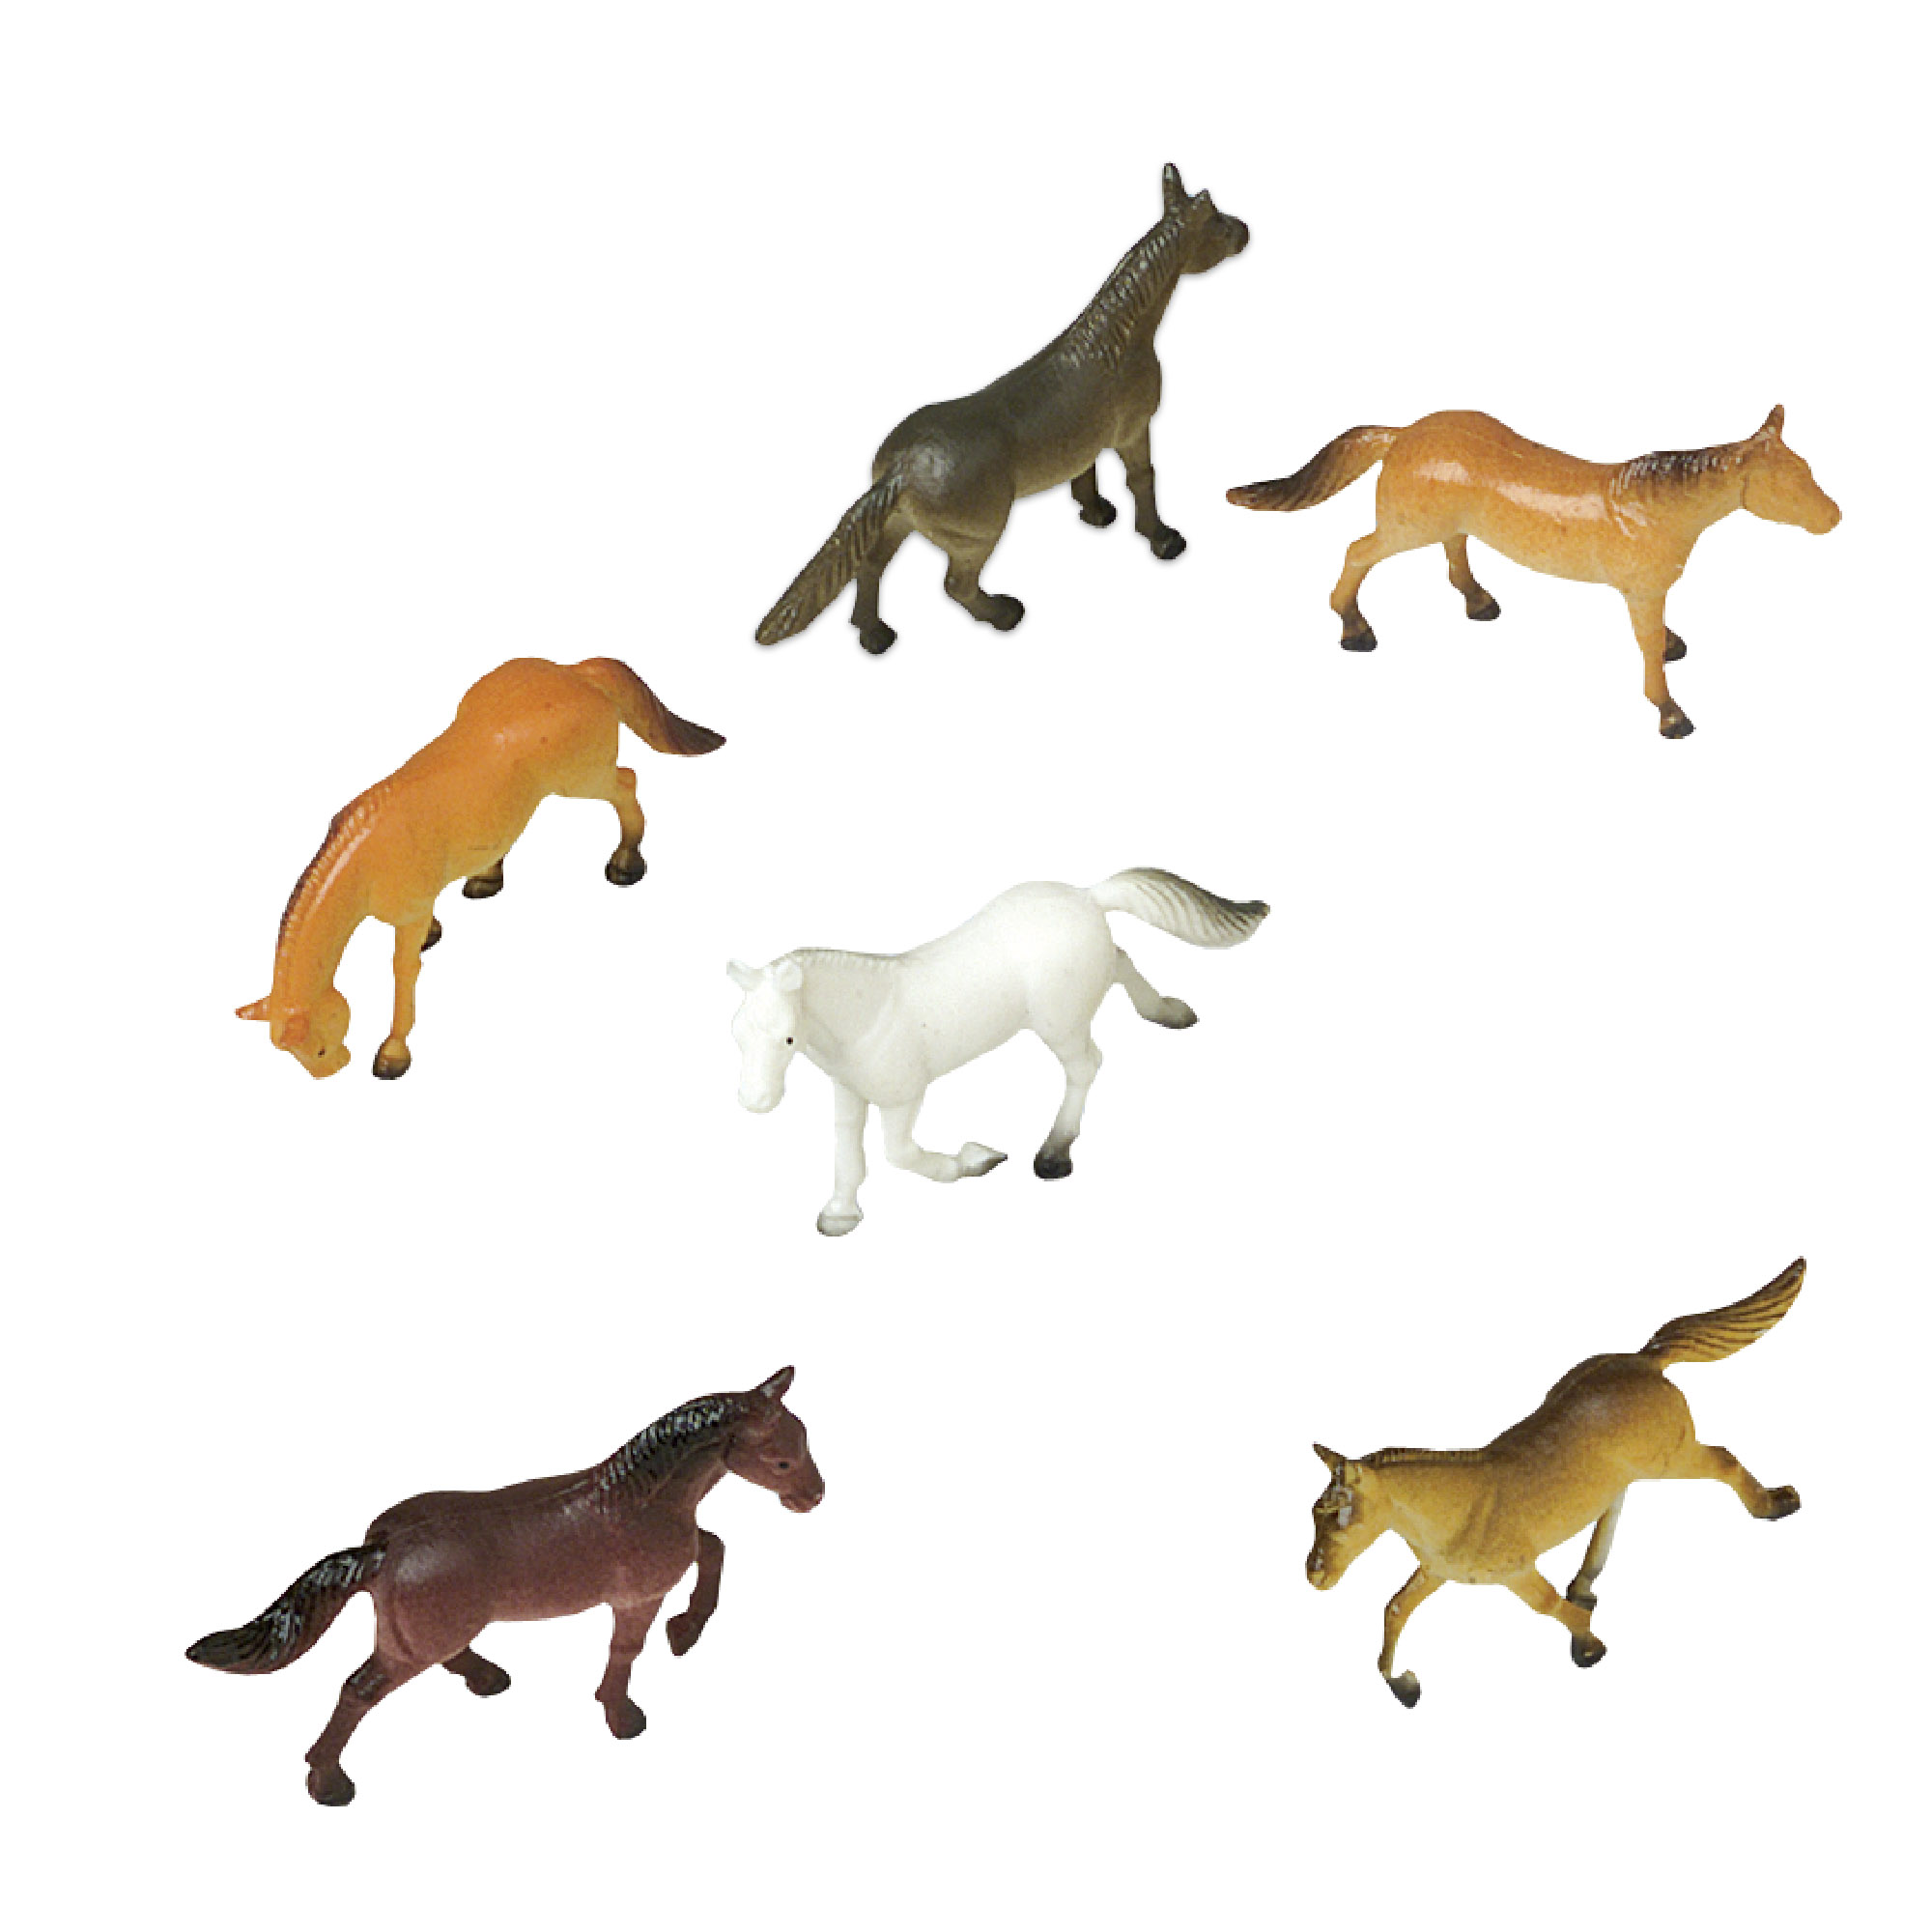 Details about   Mini Animals Figures Plastic Horse Miniature Figurines Models Cake Toppers 